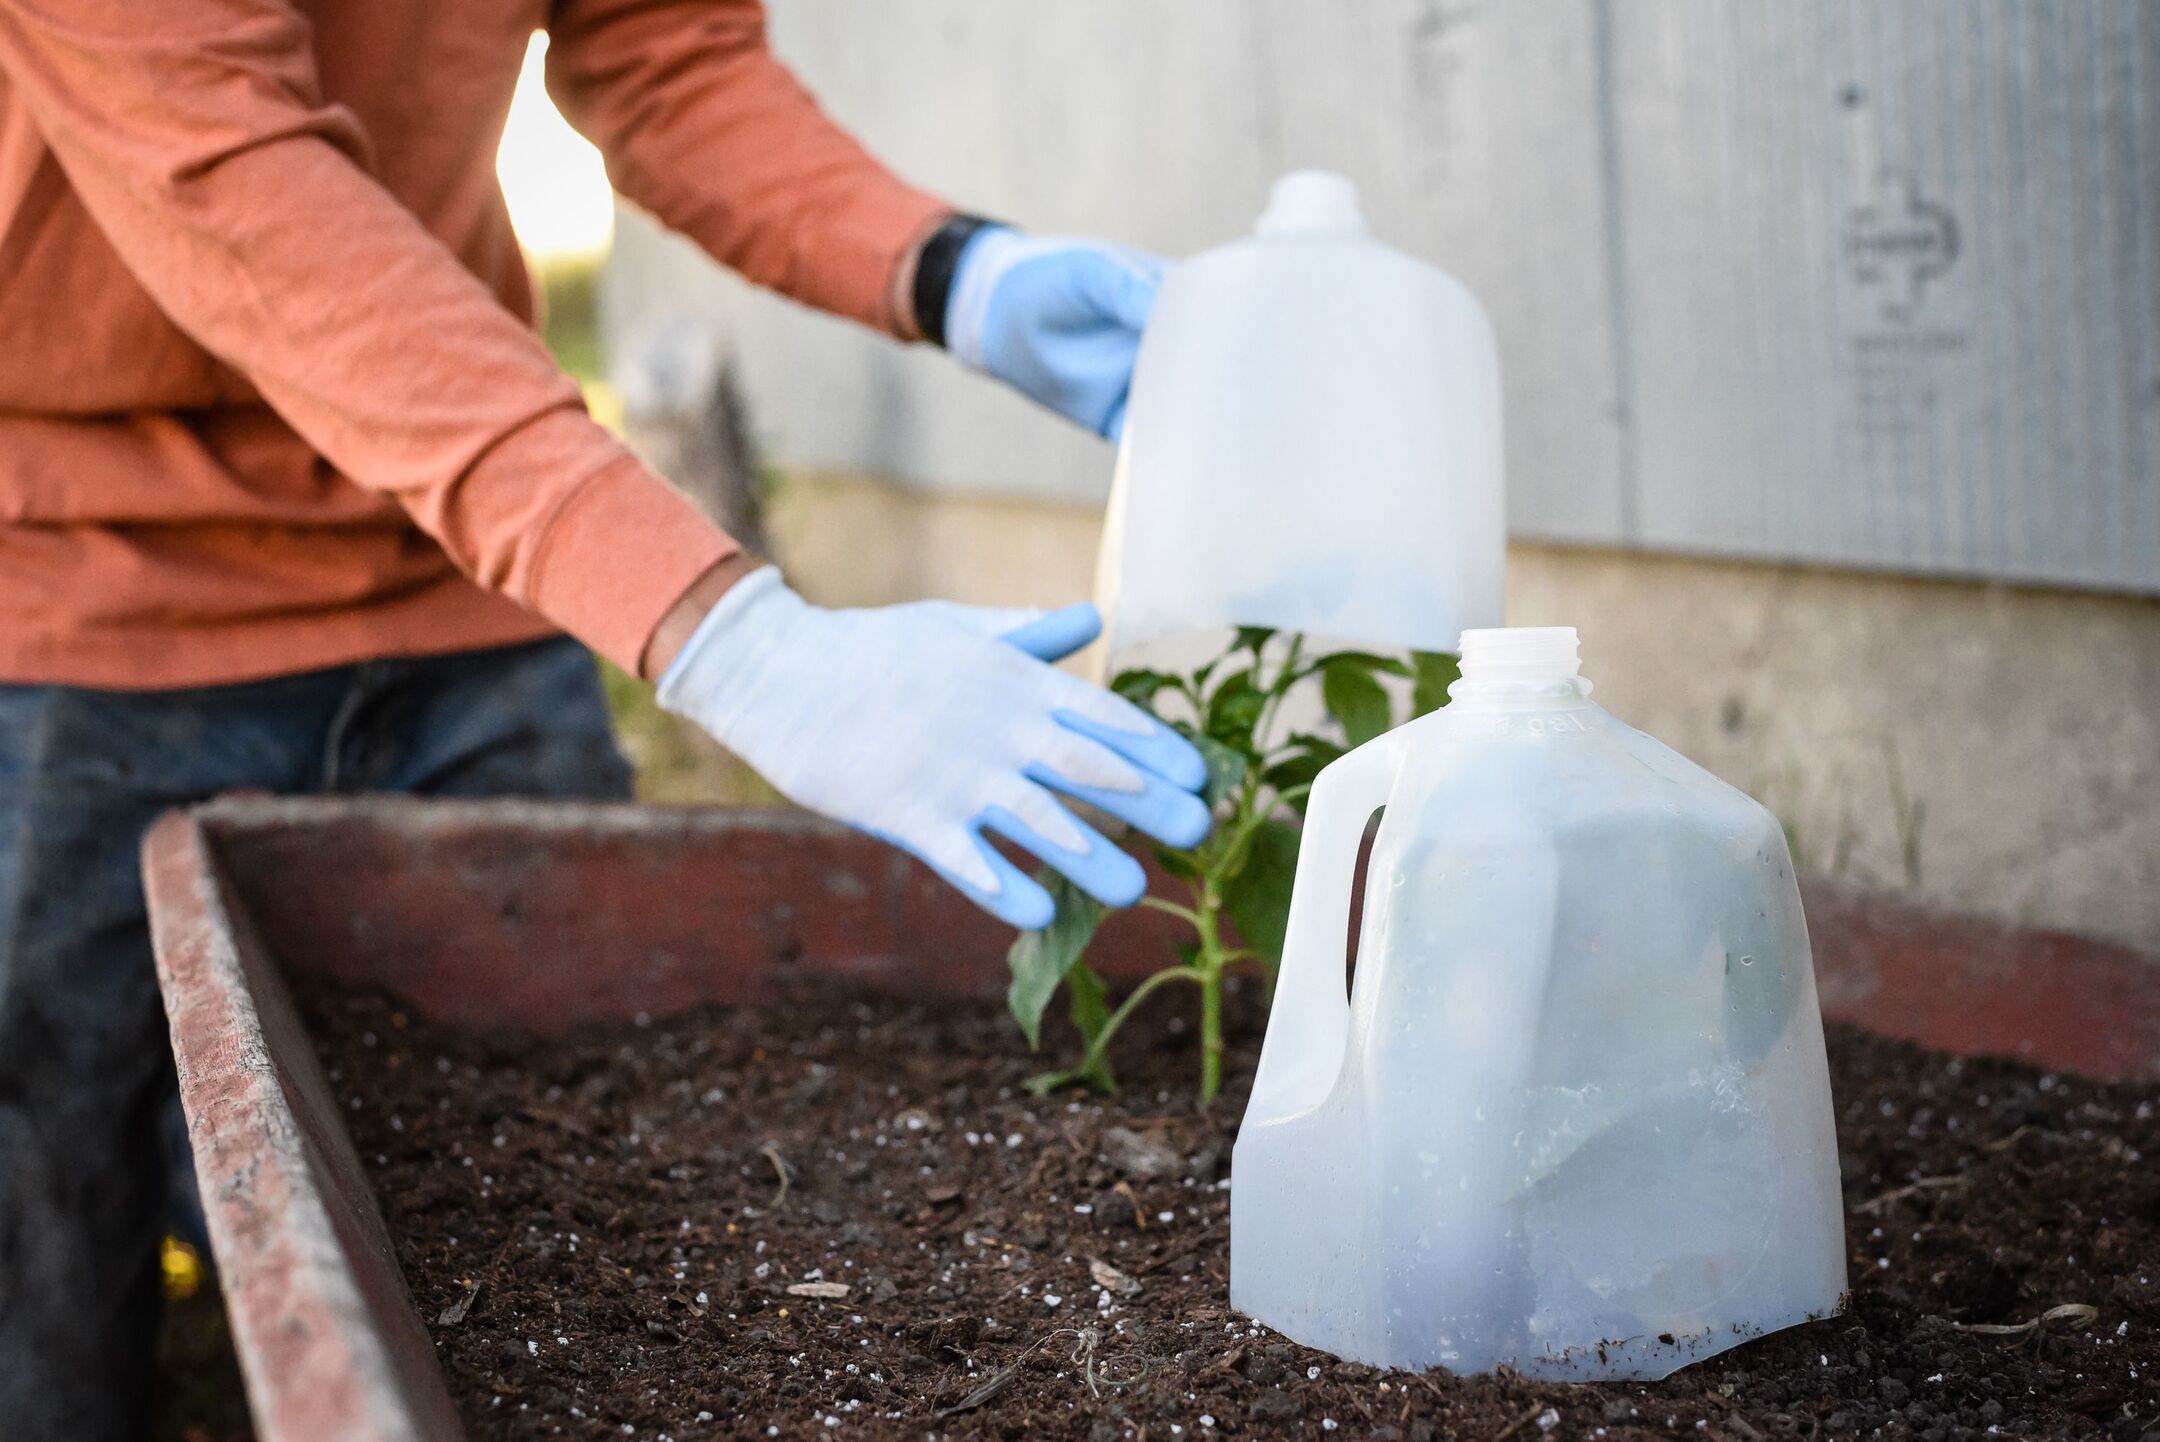 How To Take Care Of Outdoor Plants During Winter